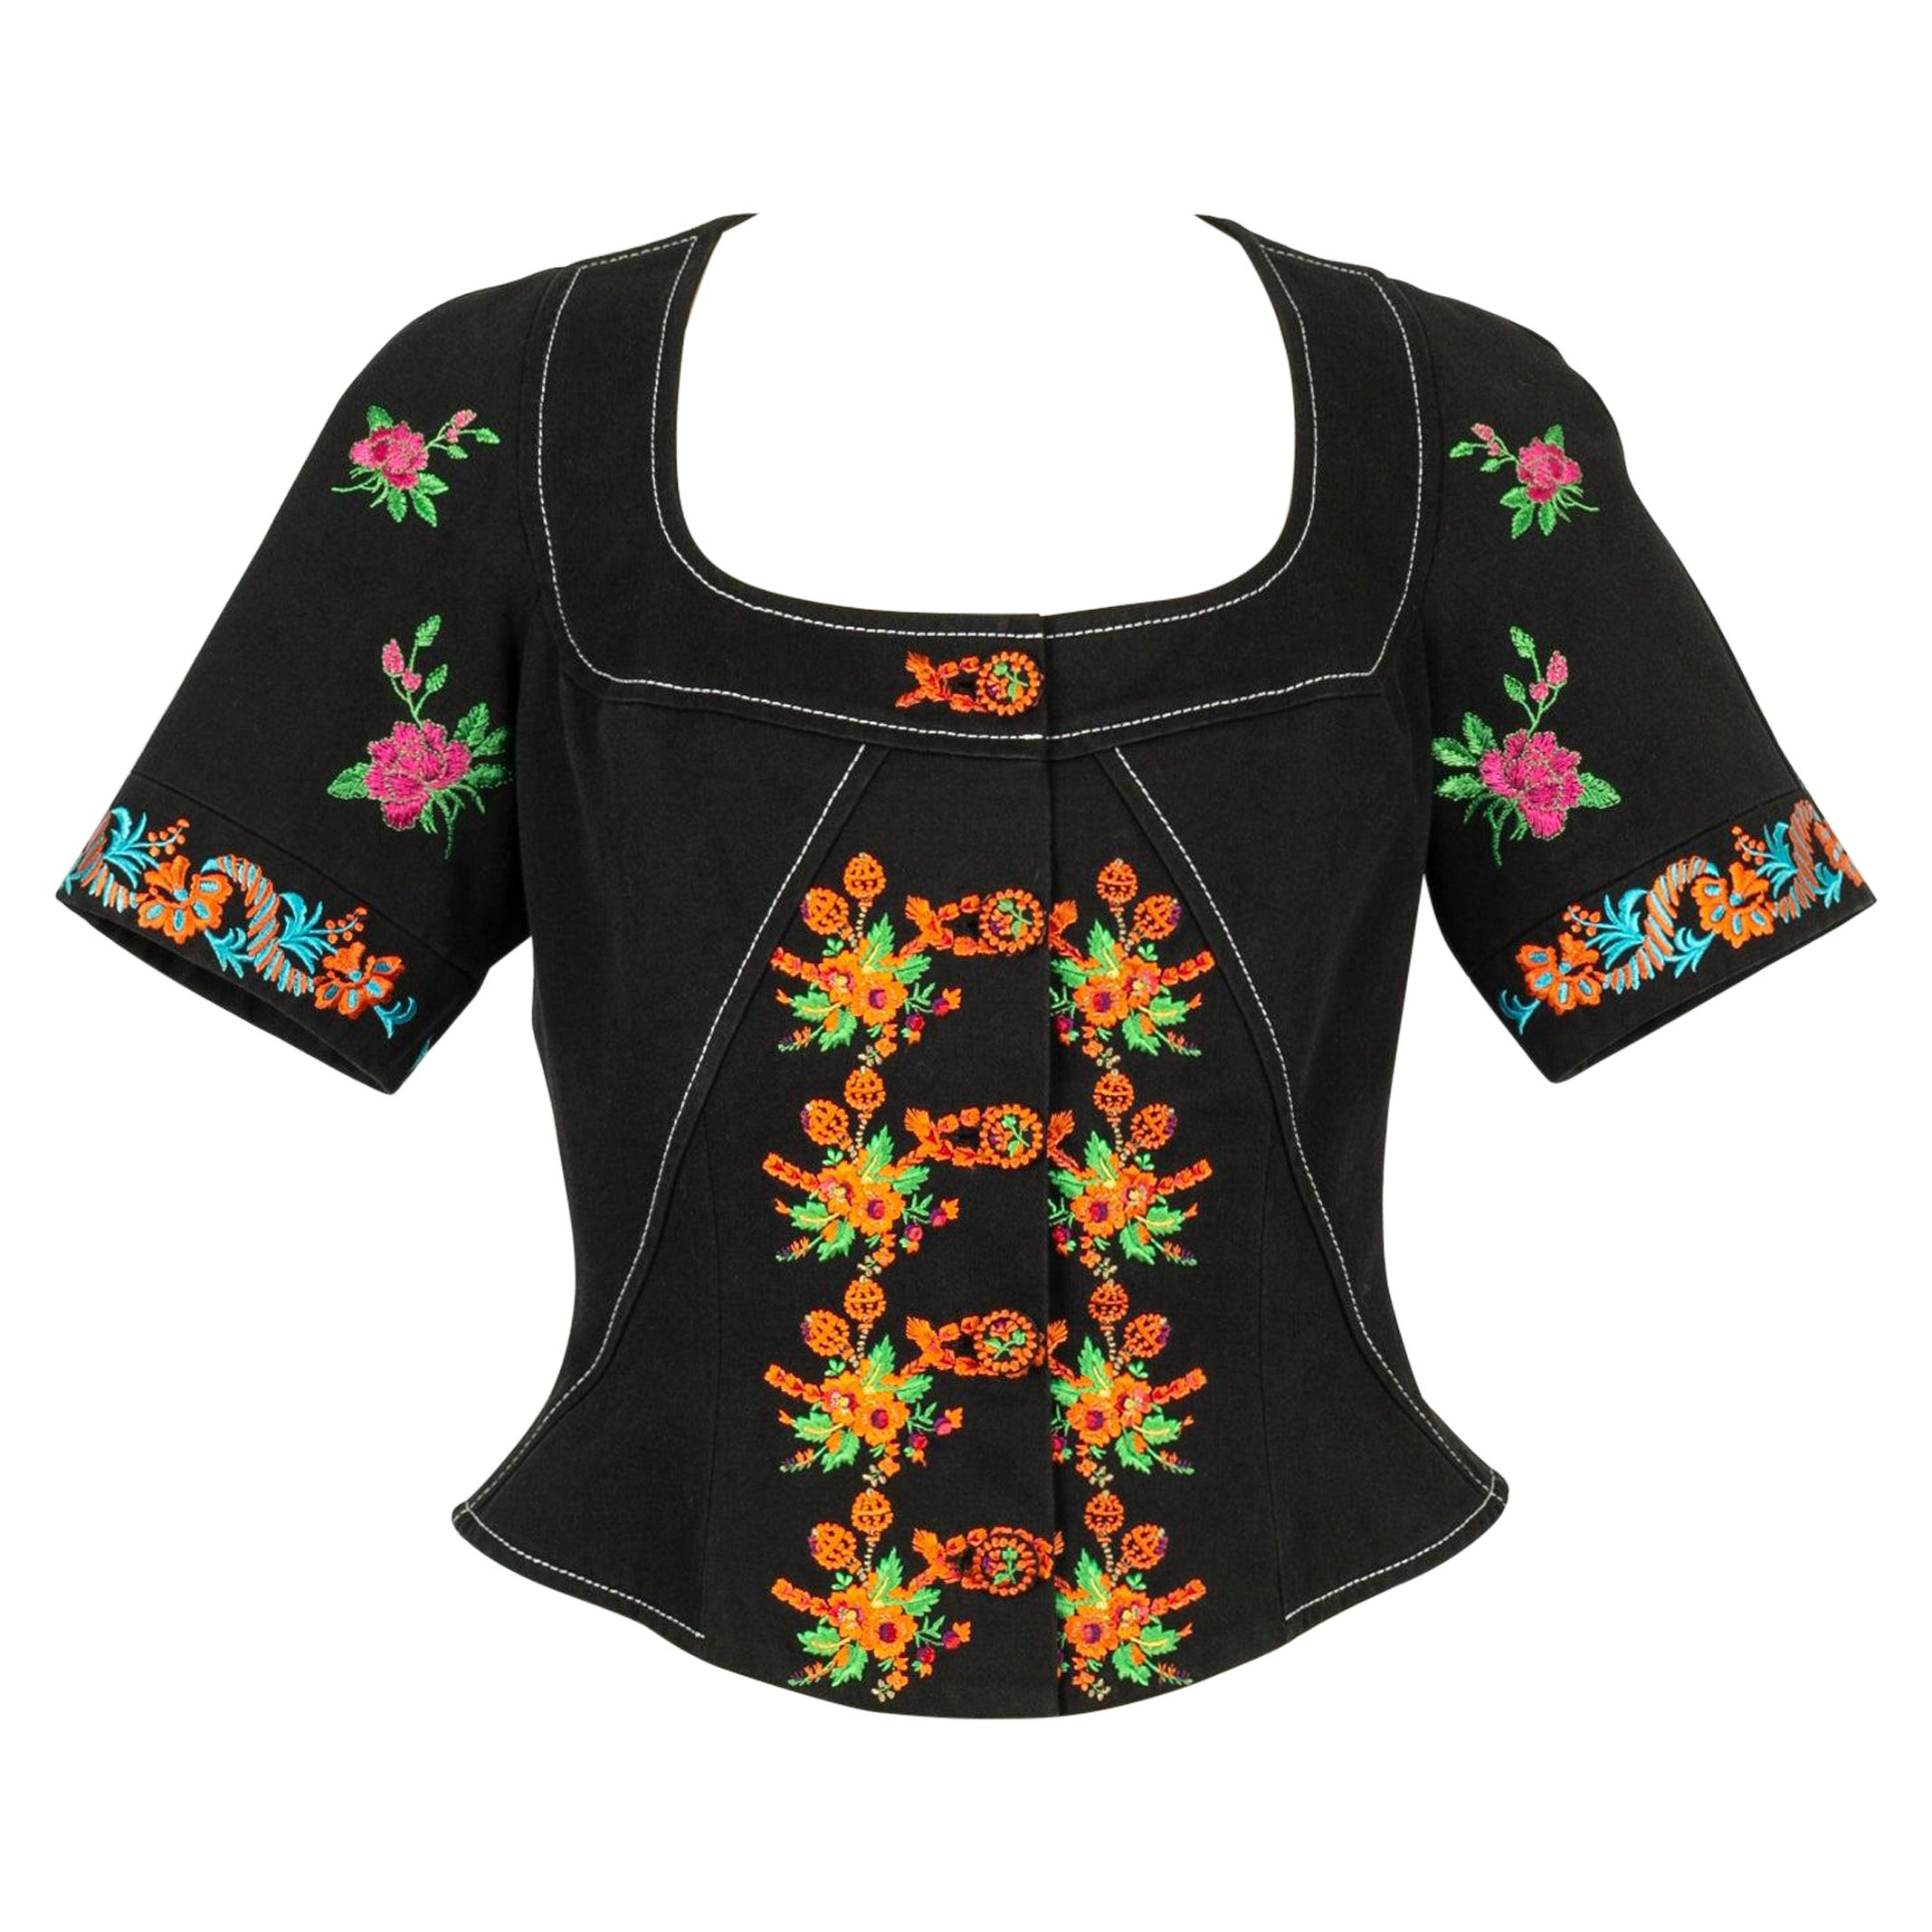 Christian Lacroix Embroidered Top in Black Cotton, 1993 For Sale